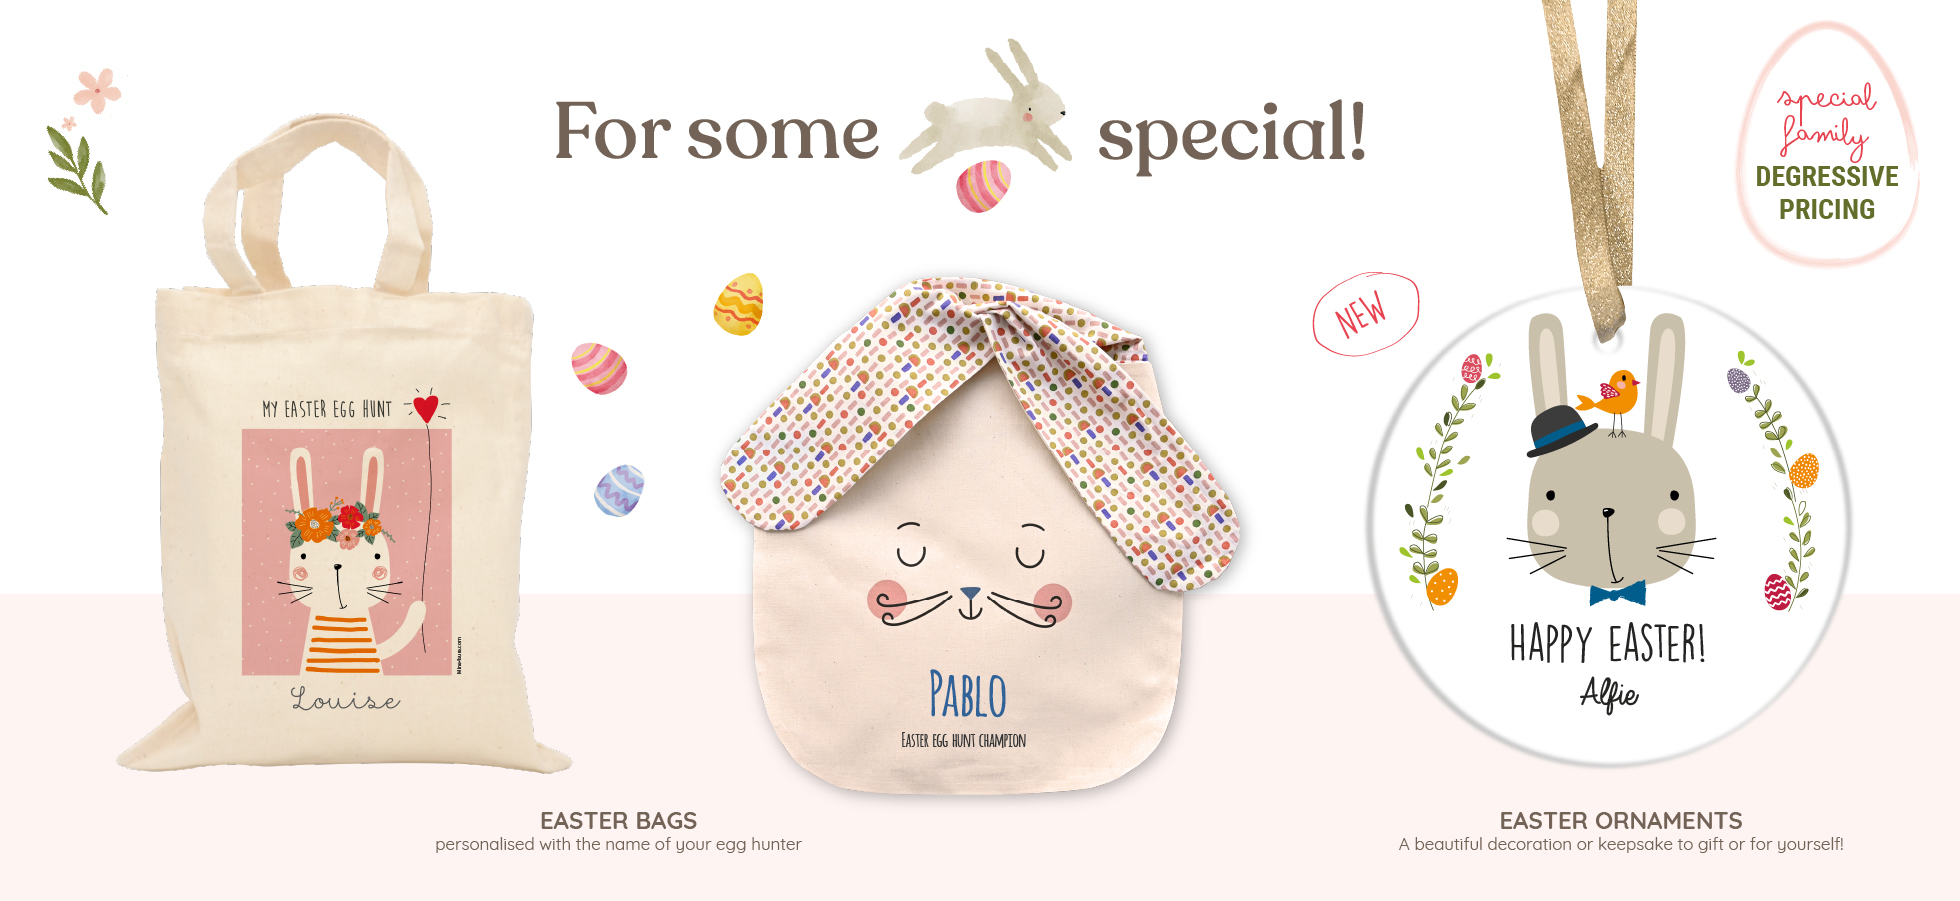 Personalised Easter bags and ornaments